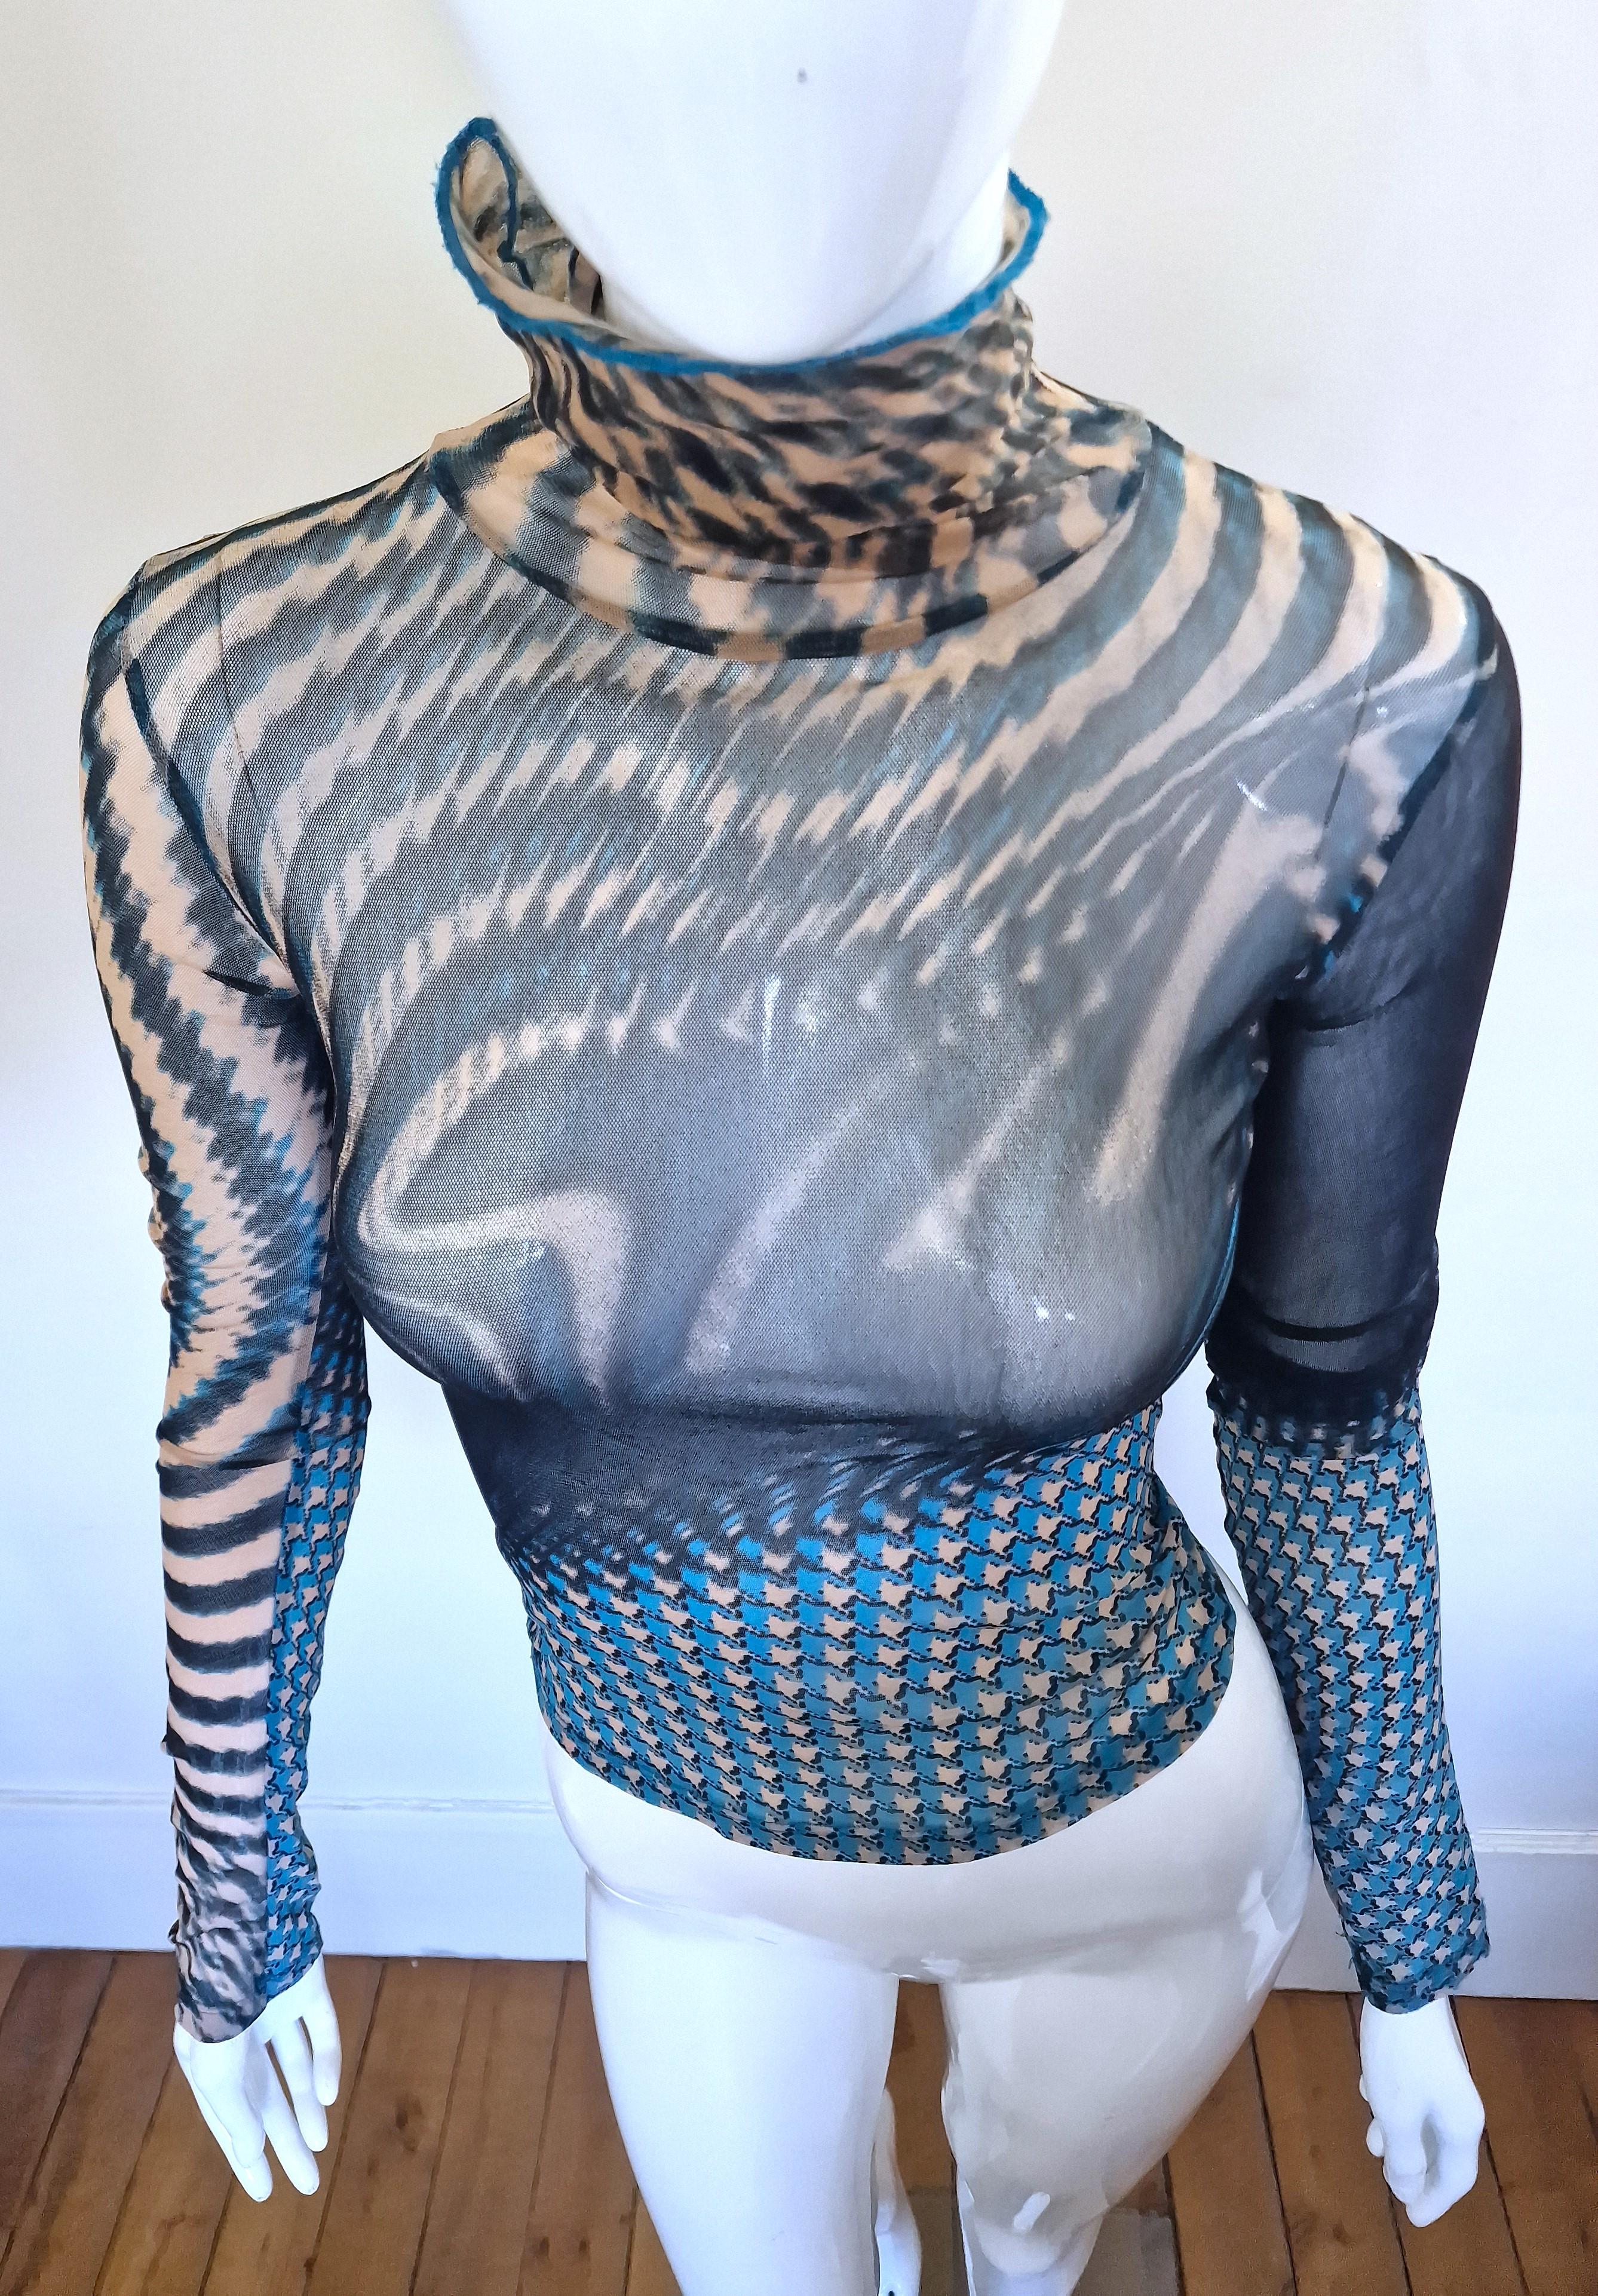 Roberto Cavalli Psychedelic Optical Illusion Sheer Mesh Transparent T-shirt Top For Sale 4